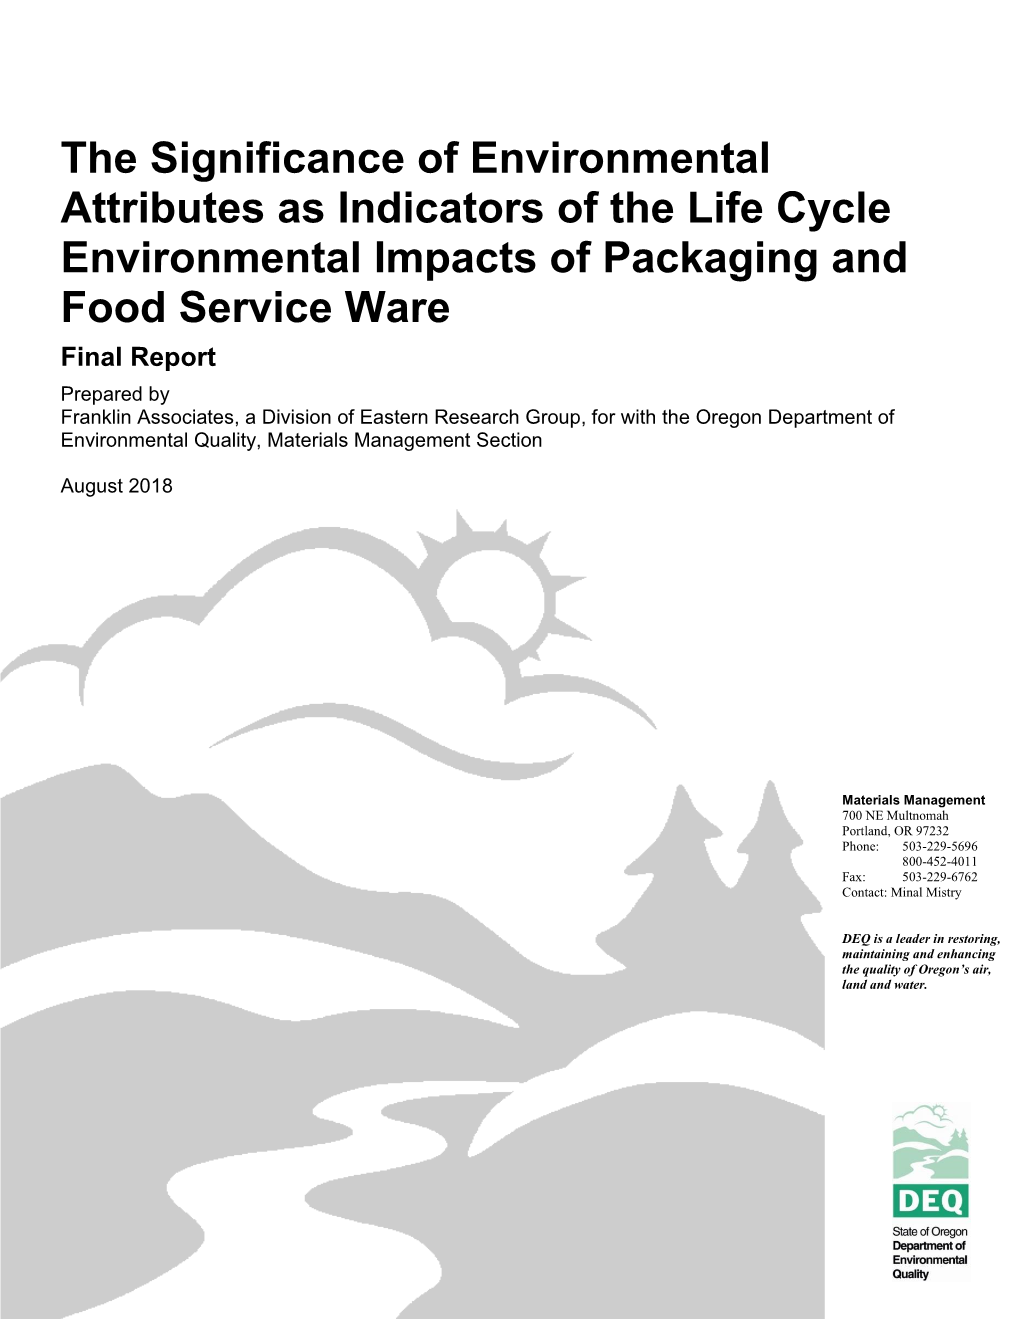 The Significance of Environmental Attributes As Indicators of the Life Cycle Environmental Impacts of Packaging and Food Service